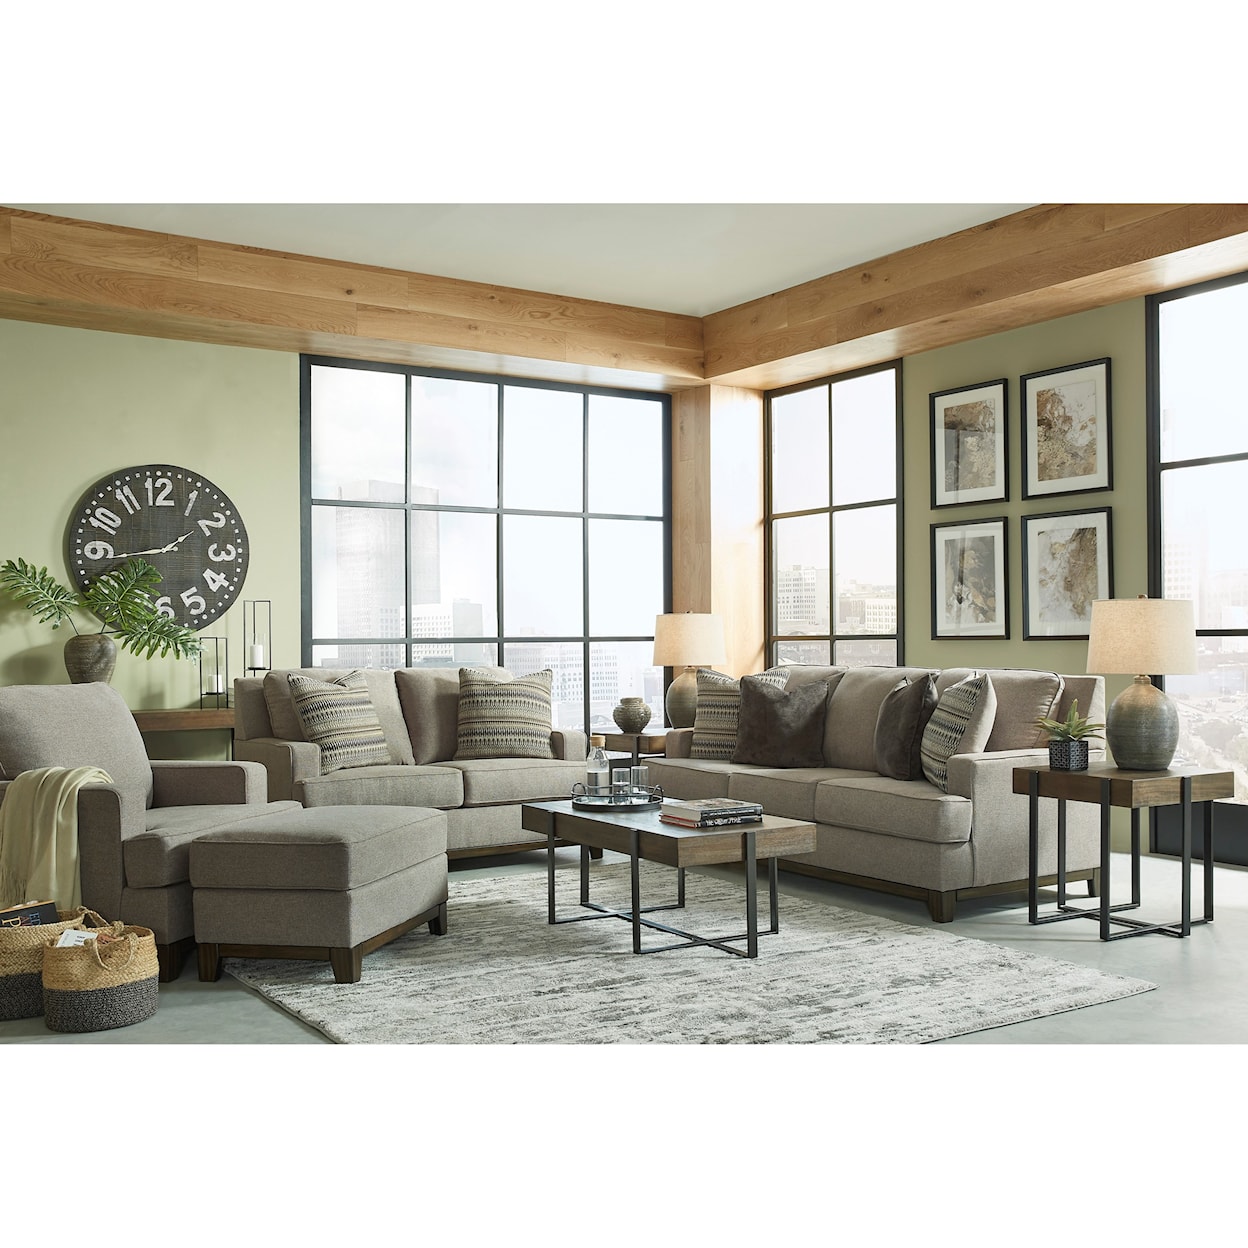 Signature Design by Ashley Kaywood Sofa, Loveseat, Chair, and Ottoman